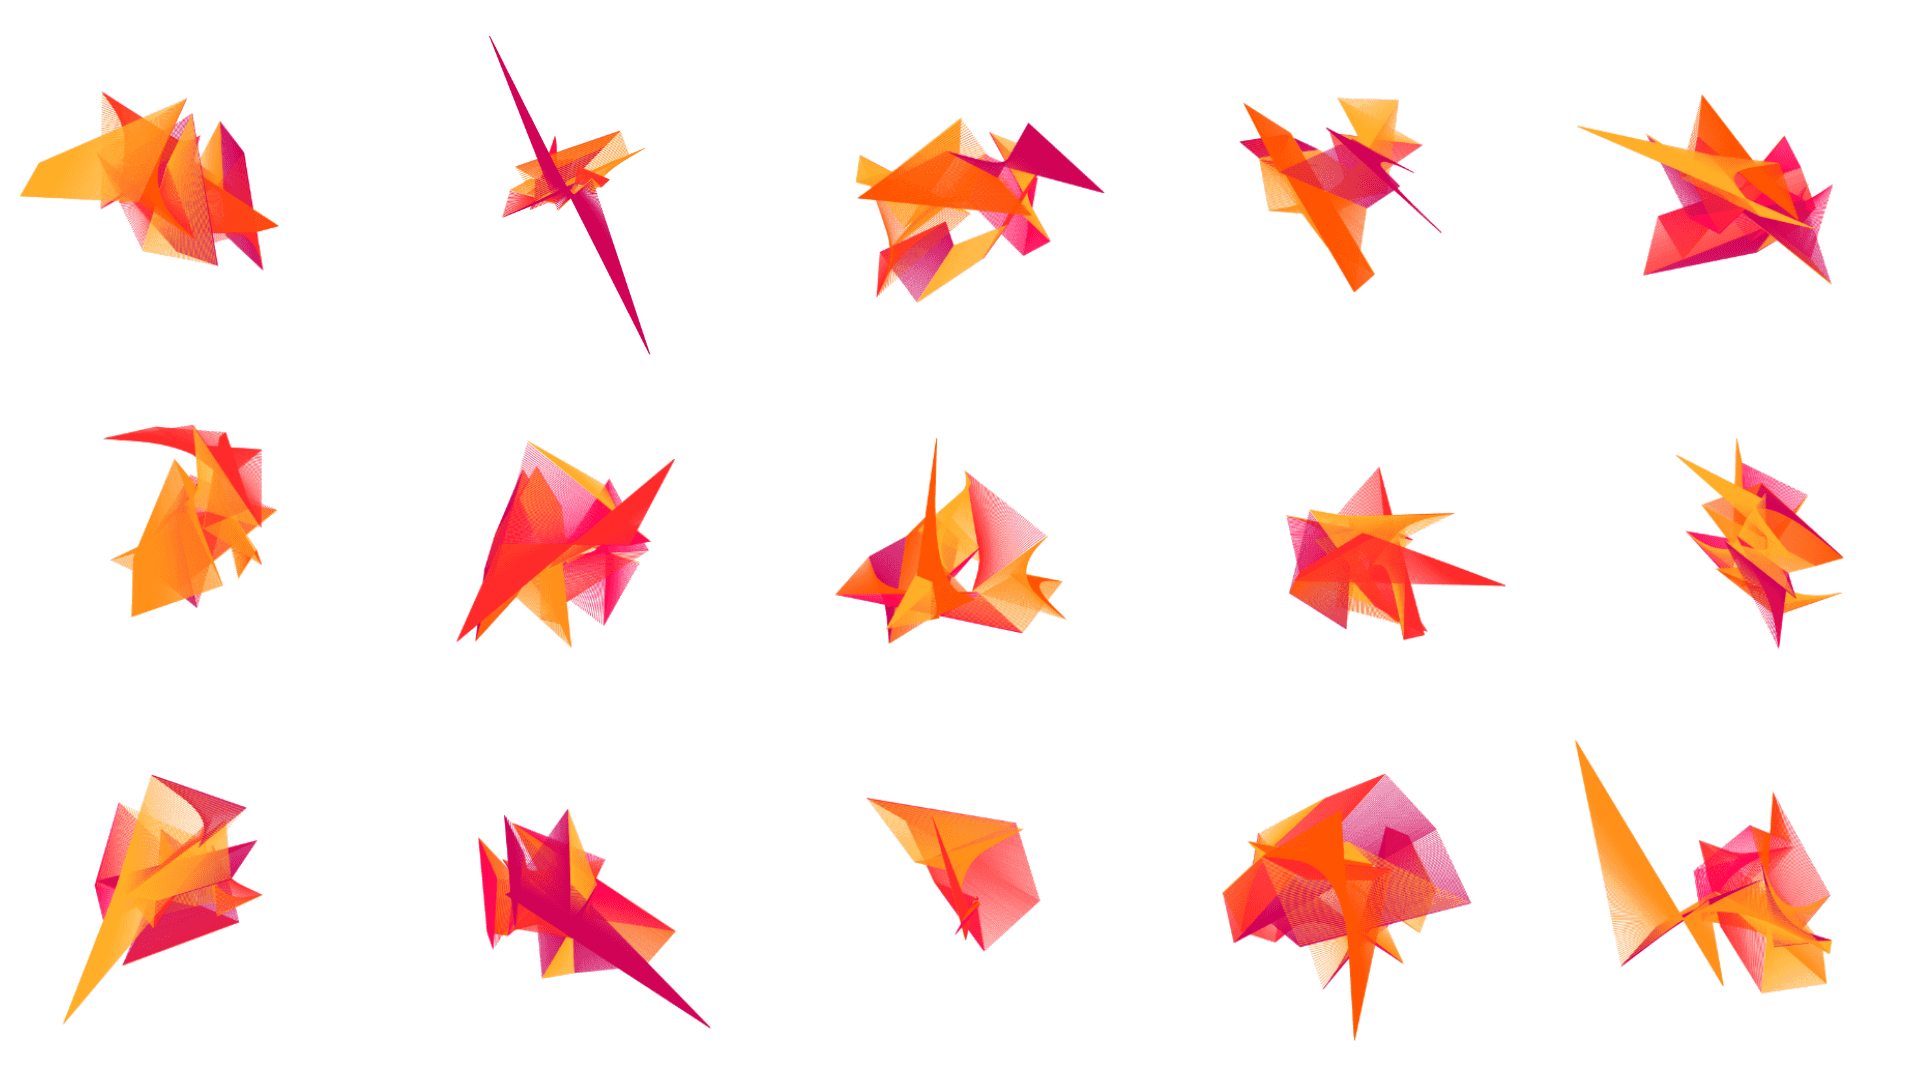 Geometric shapes made up of fine lines in yellow, orange and pink.